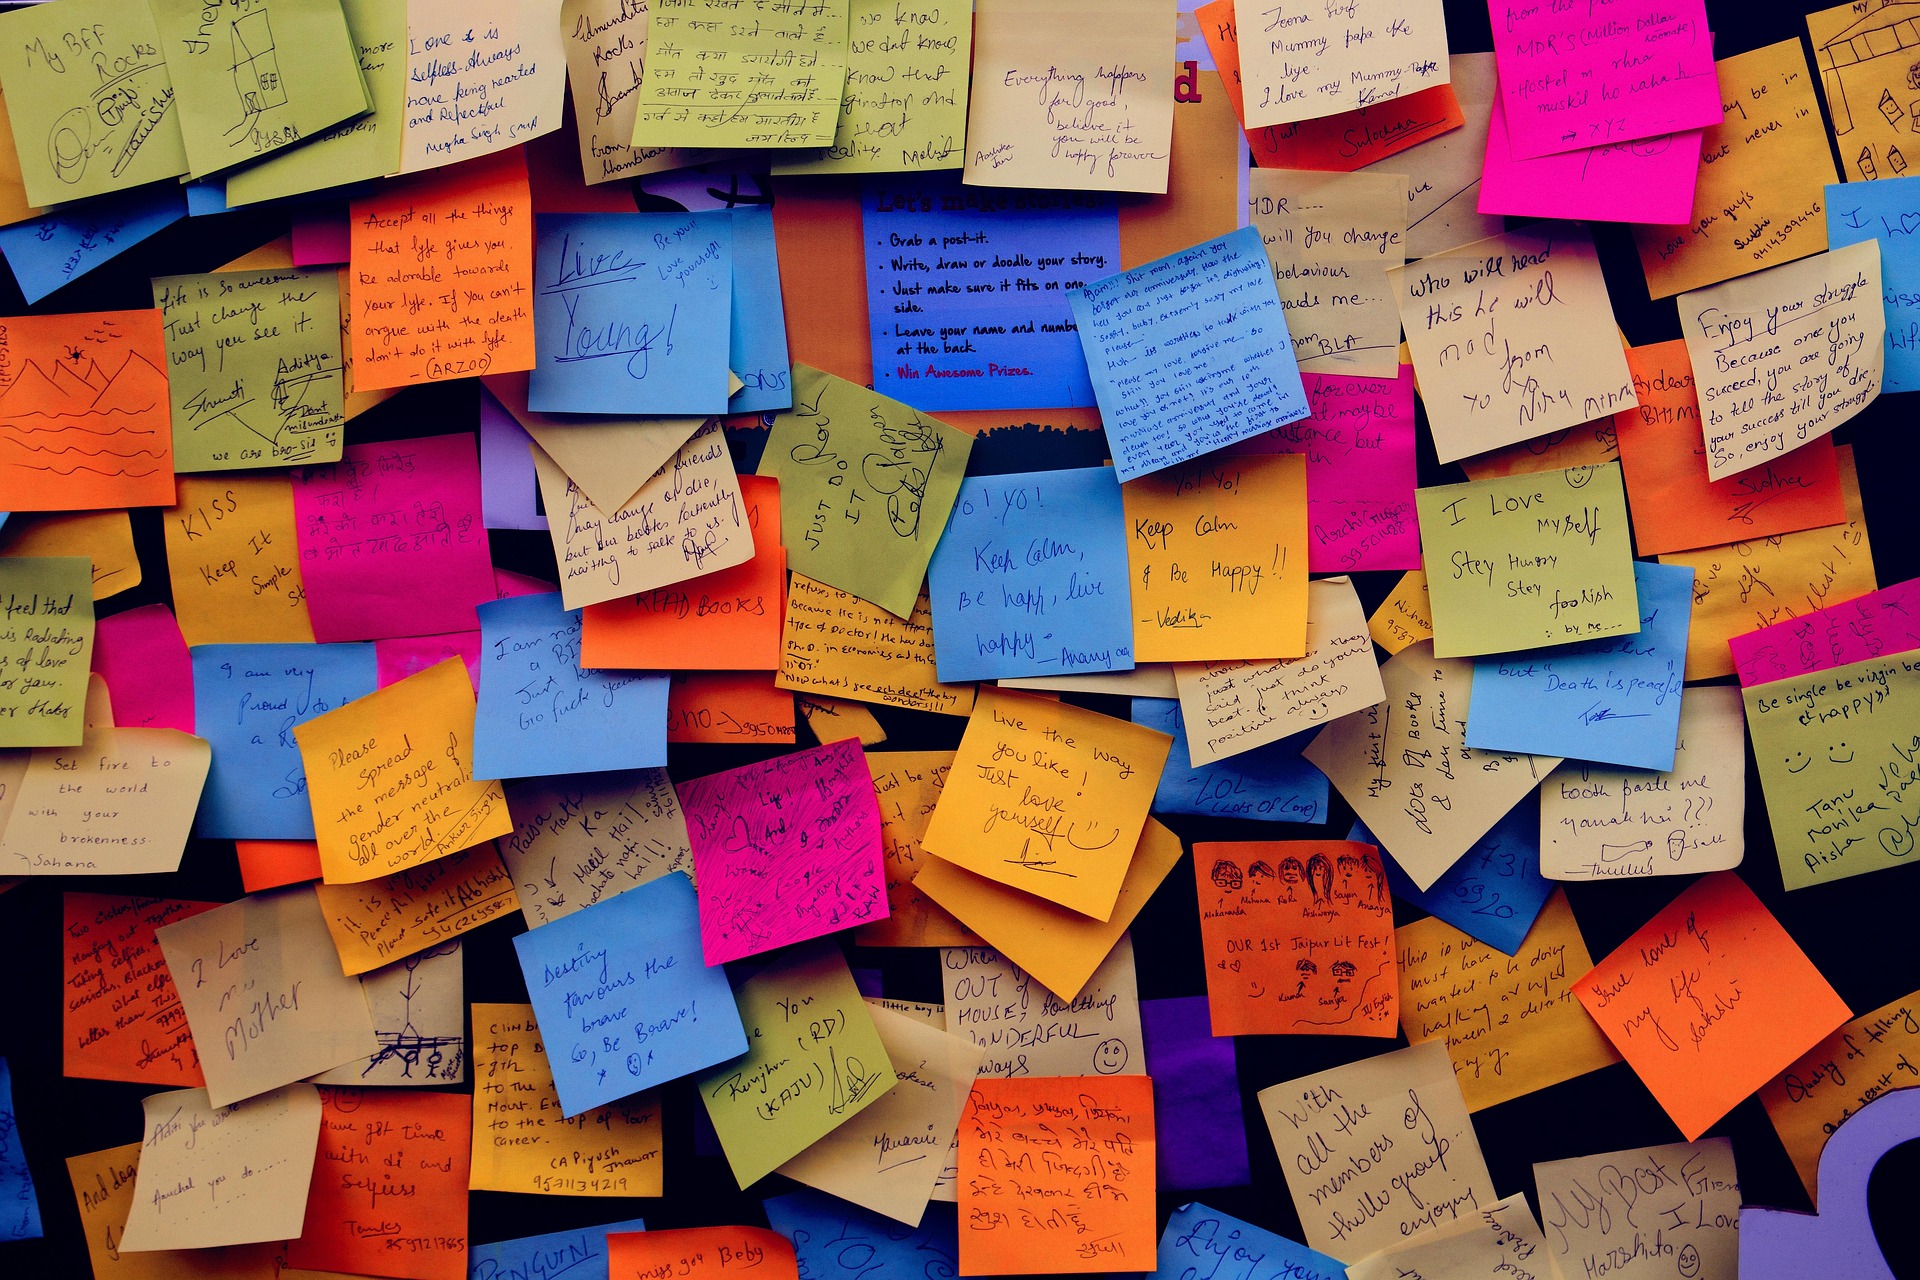 Coloured post-it notes on a board